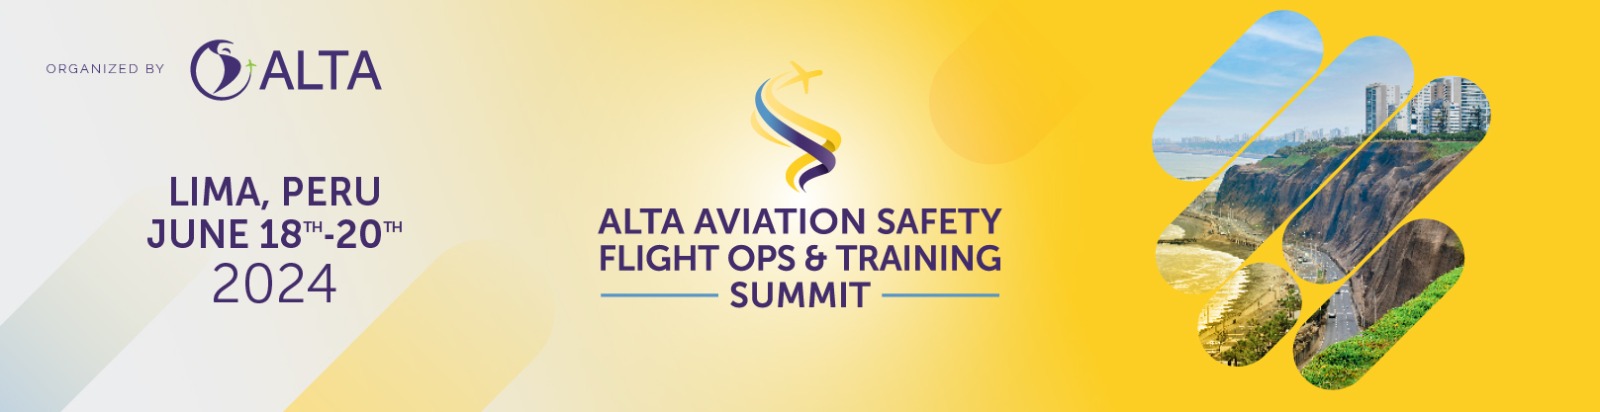 ALTA NEWS - ALTA Aviation Safety, Flight Ops & Training Summit: the premier safety & training summit for aviation in Latin America and the Caribbean